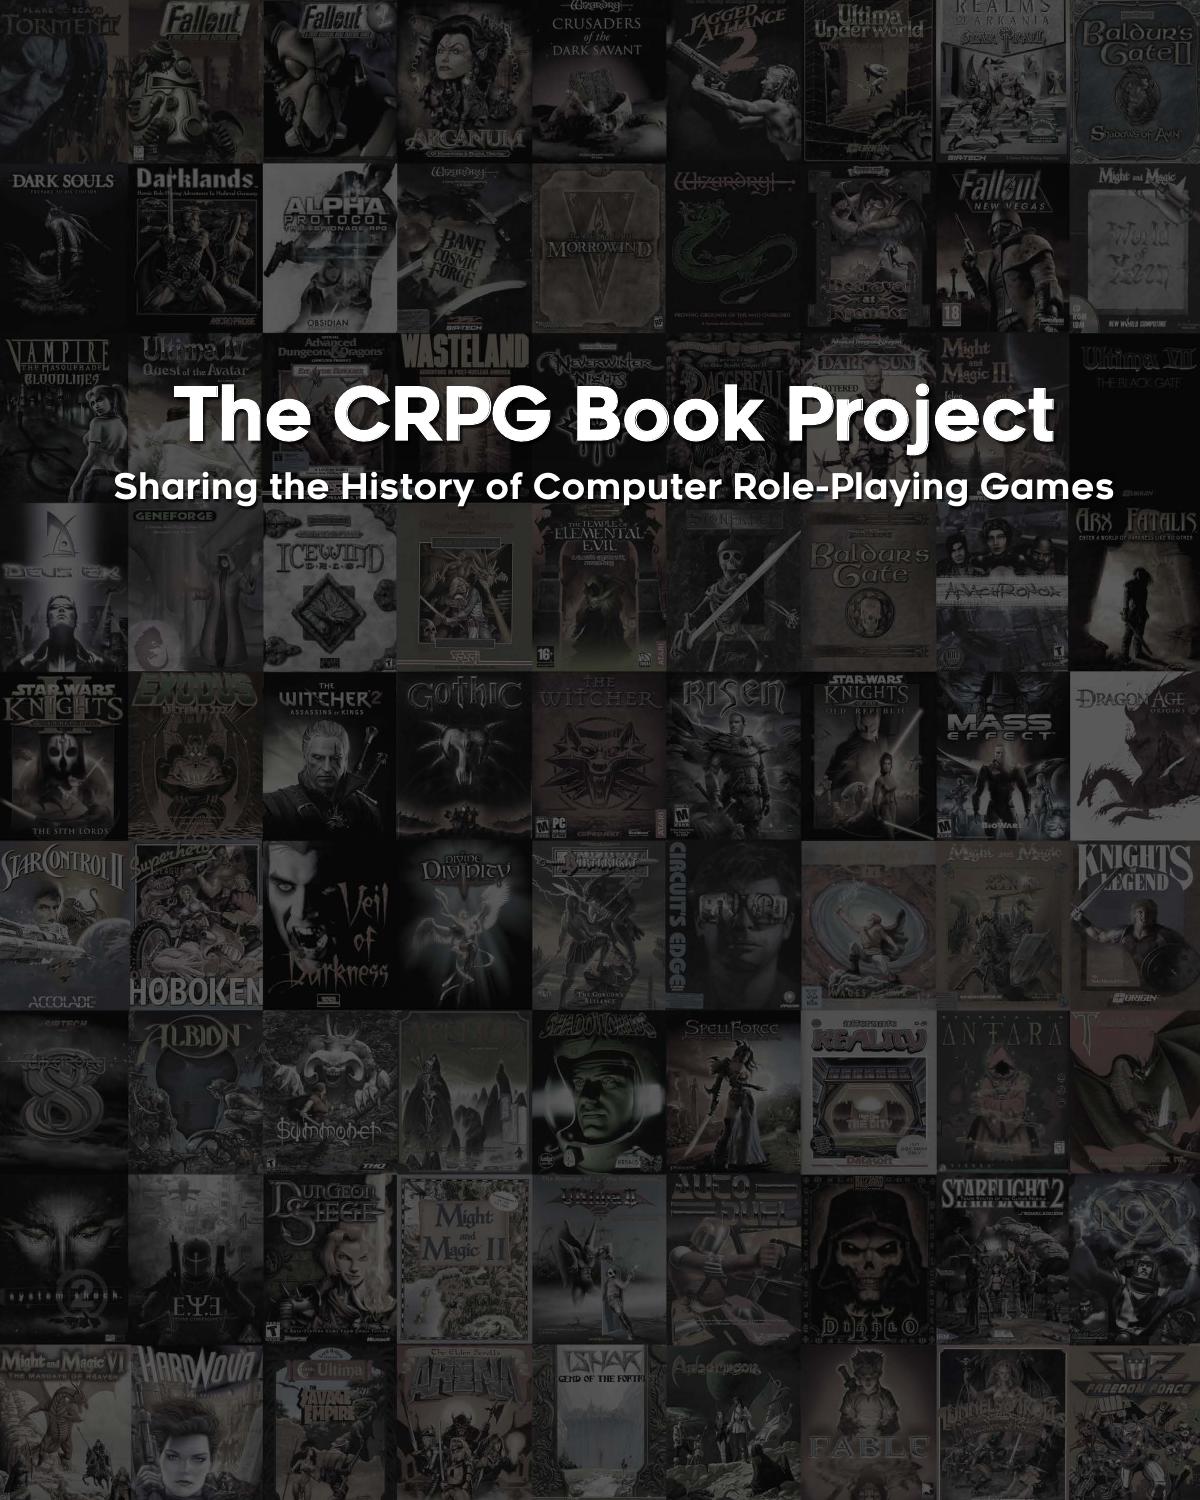 The CRPG Book Project